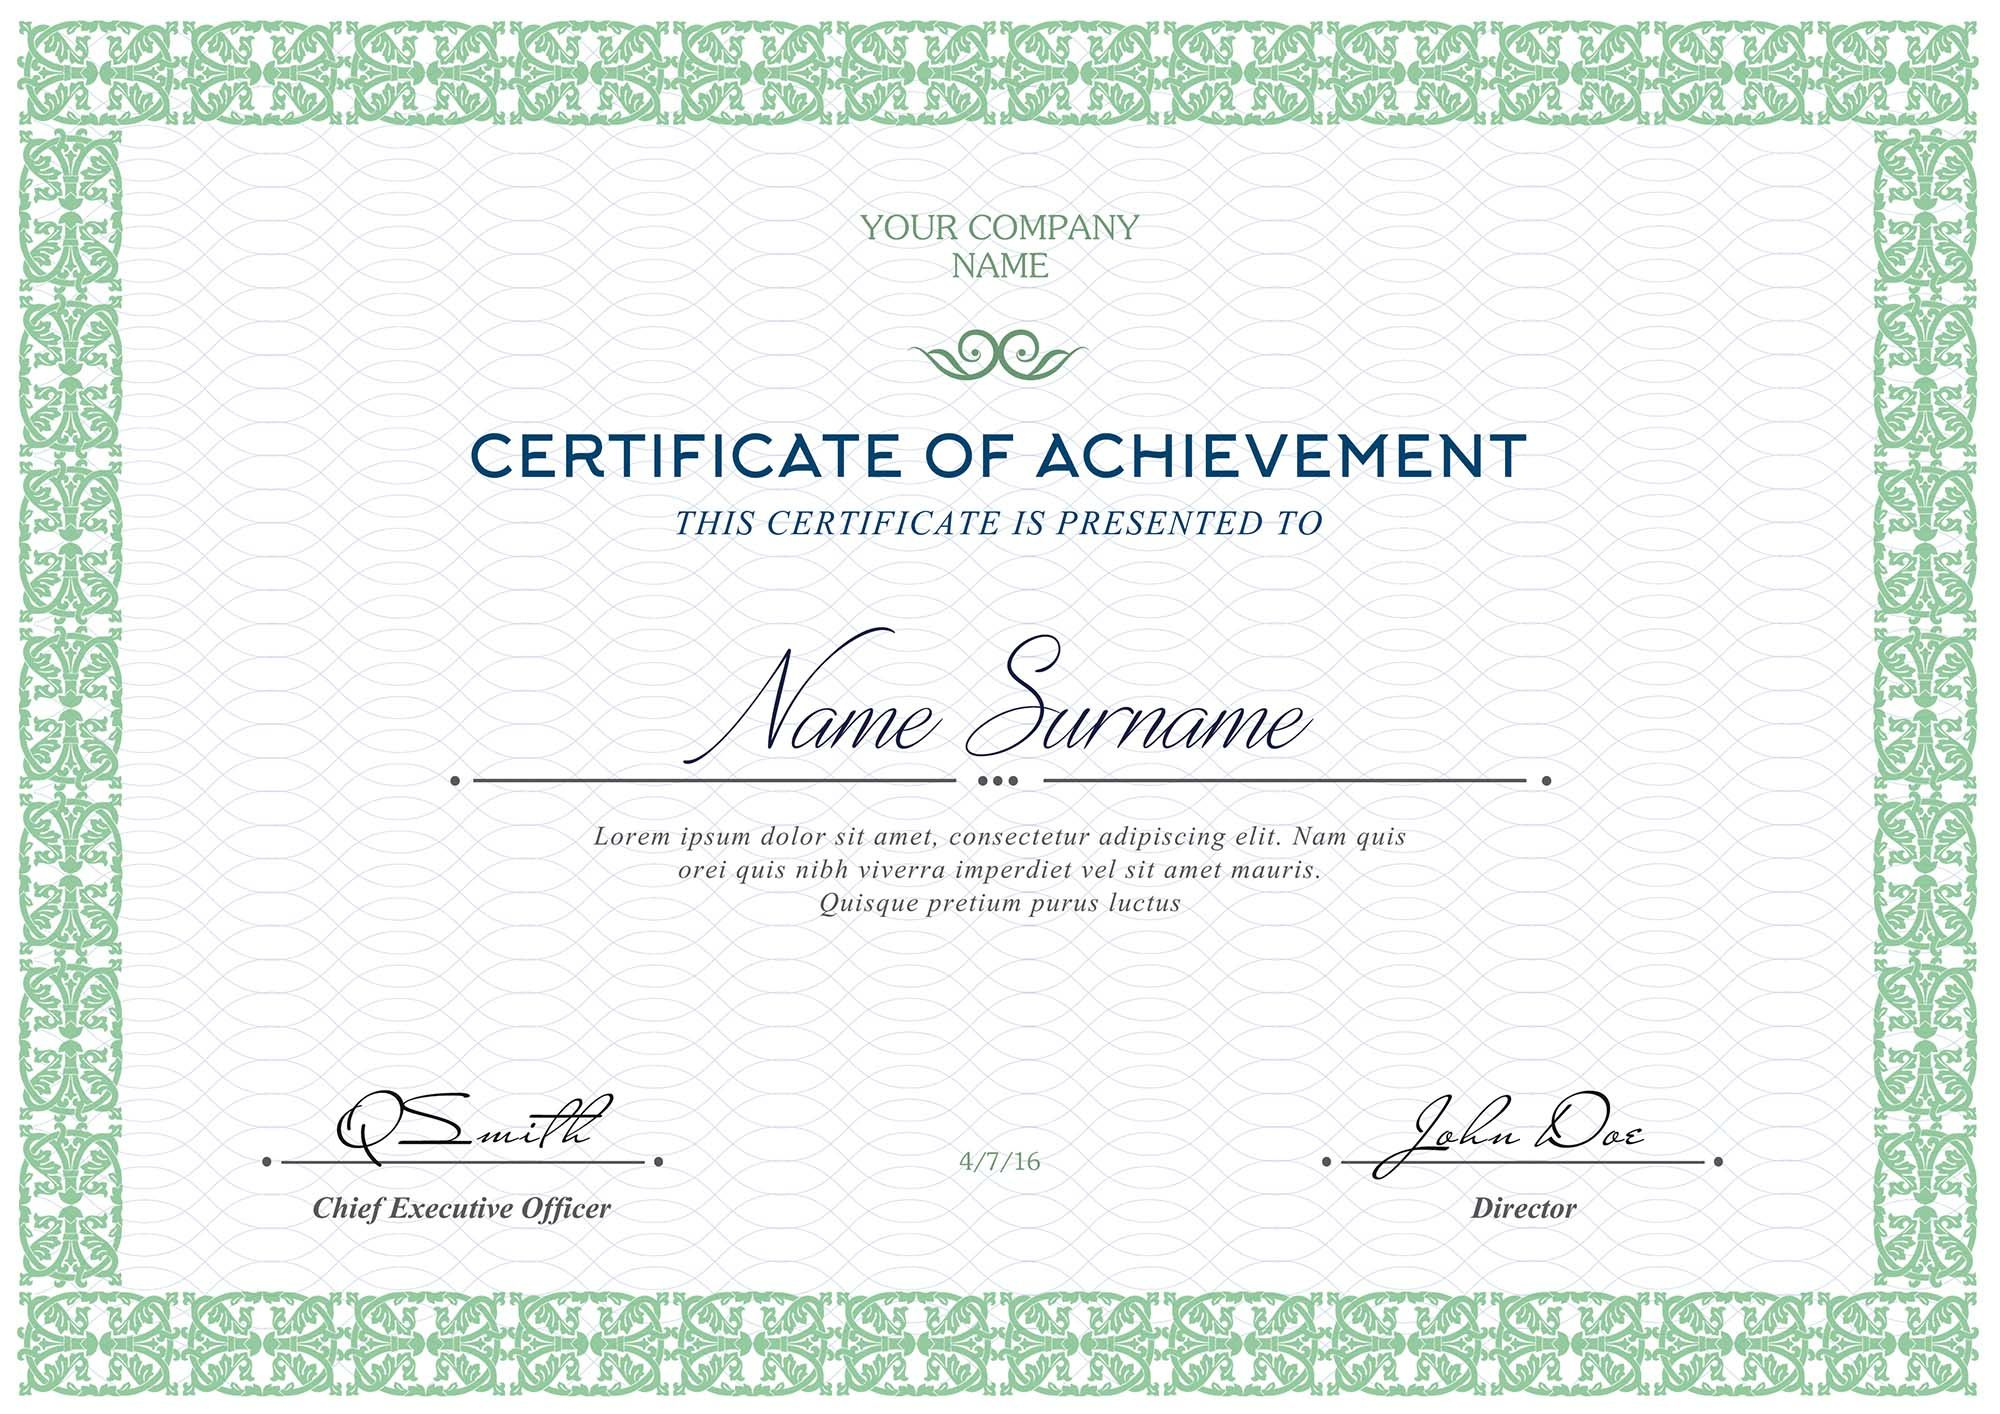 Free Certificates Templates (Psd) With Update Certificates With Regard To Fantastic Update Certificates That Use Certificate Templates